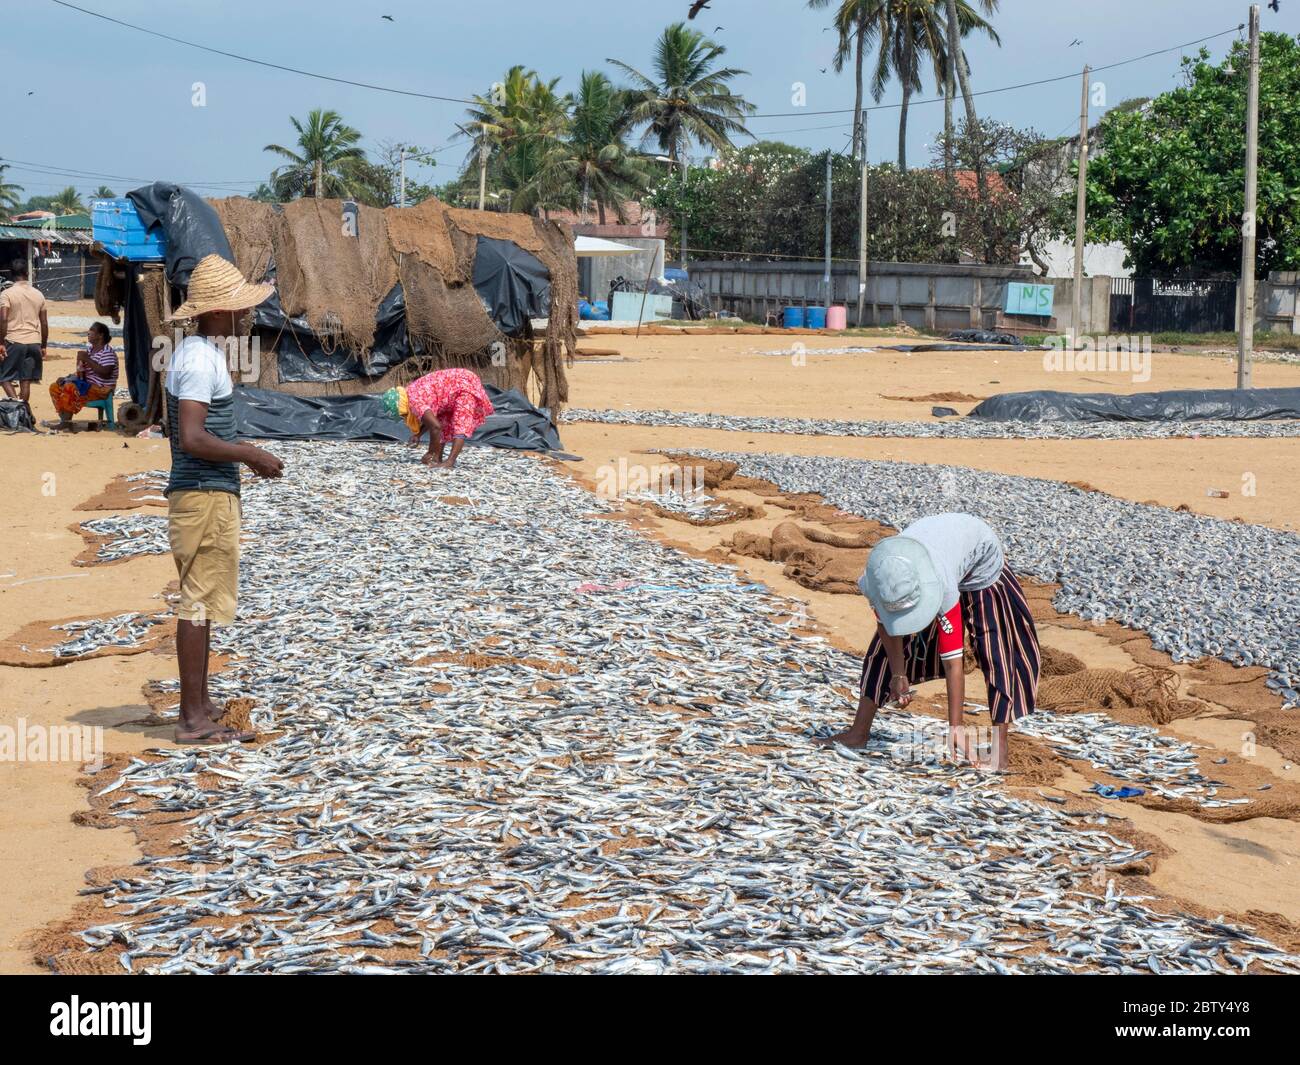 Workers lay out the days catch to dry in the sun at the Negombo fish market, Negombo, Sri Lanka, Asia Stock Photo